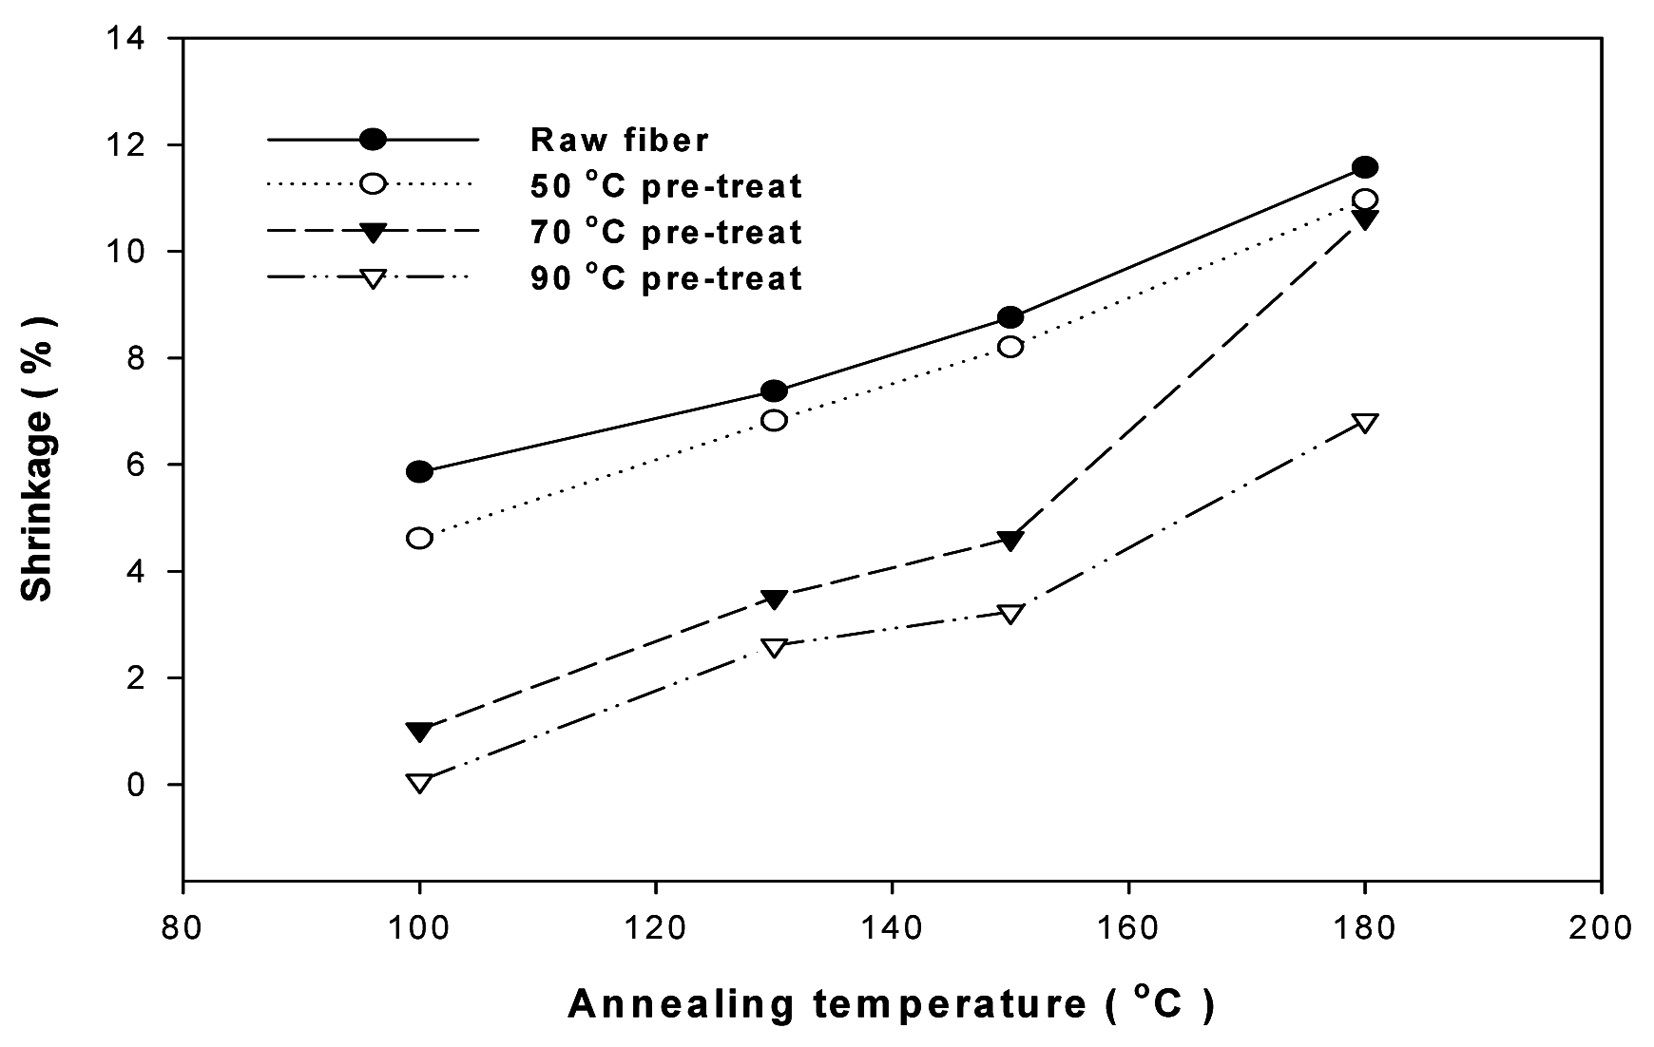 The relationship between the annealing temperature and the
shrinkage of PTT yarns as a function of pre-treat temperature.